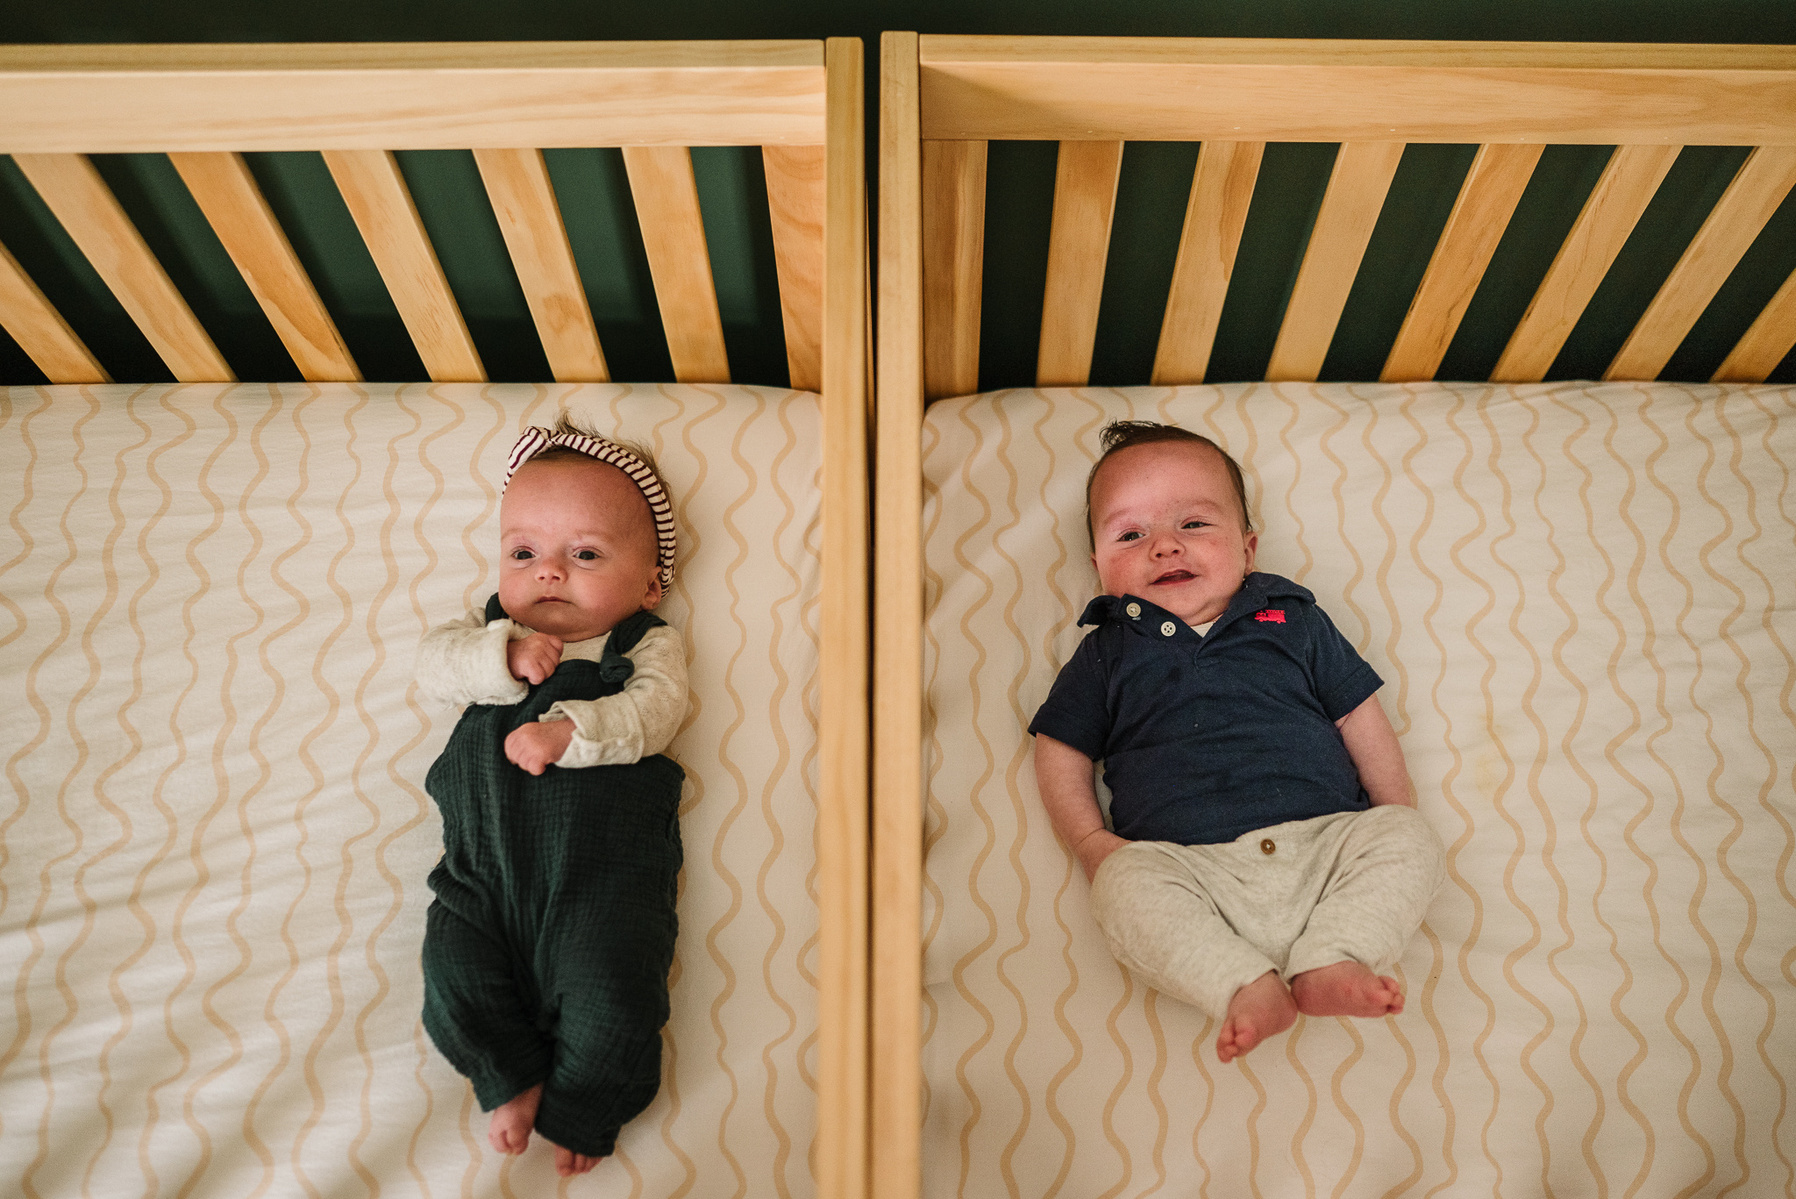 Boston newborn twins lay besides each other in matching cribs